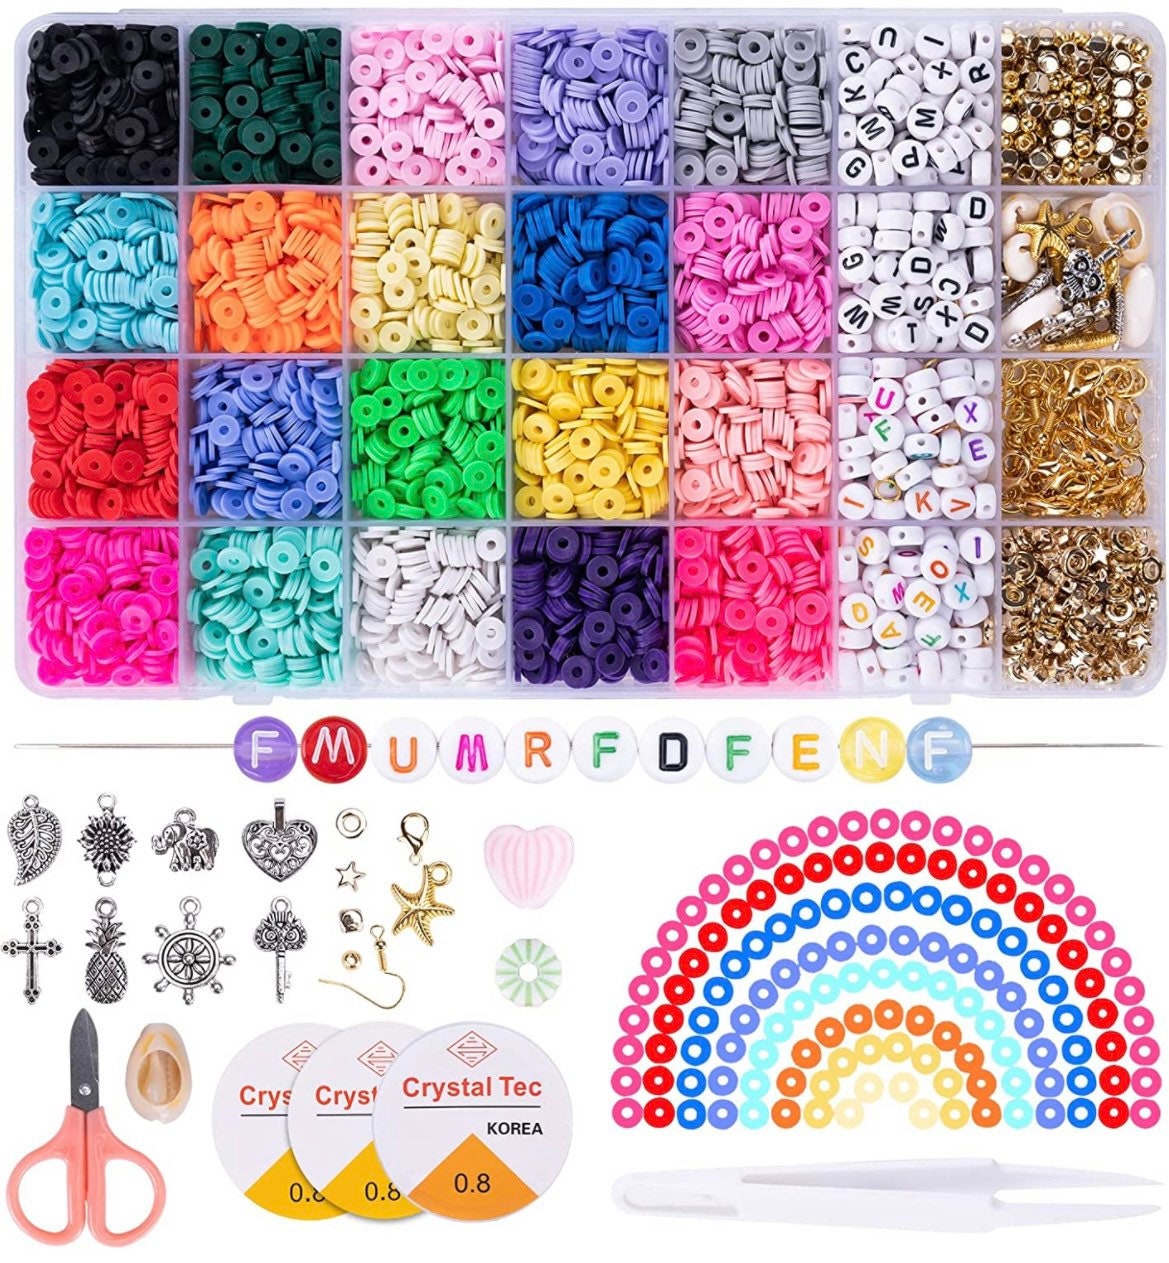 Cheap 6000 Pcs Clay Beads for Bracelet Making, 24 Colors Flat Round Polymer Clay  Beads Elastic Strings for Jewelry Making Kit Bracelets Necklace